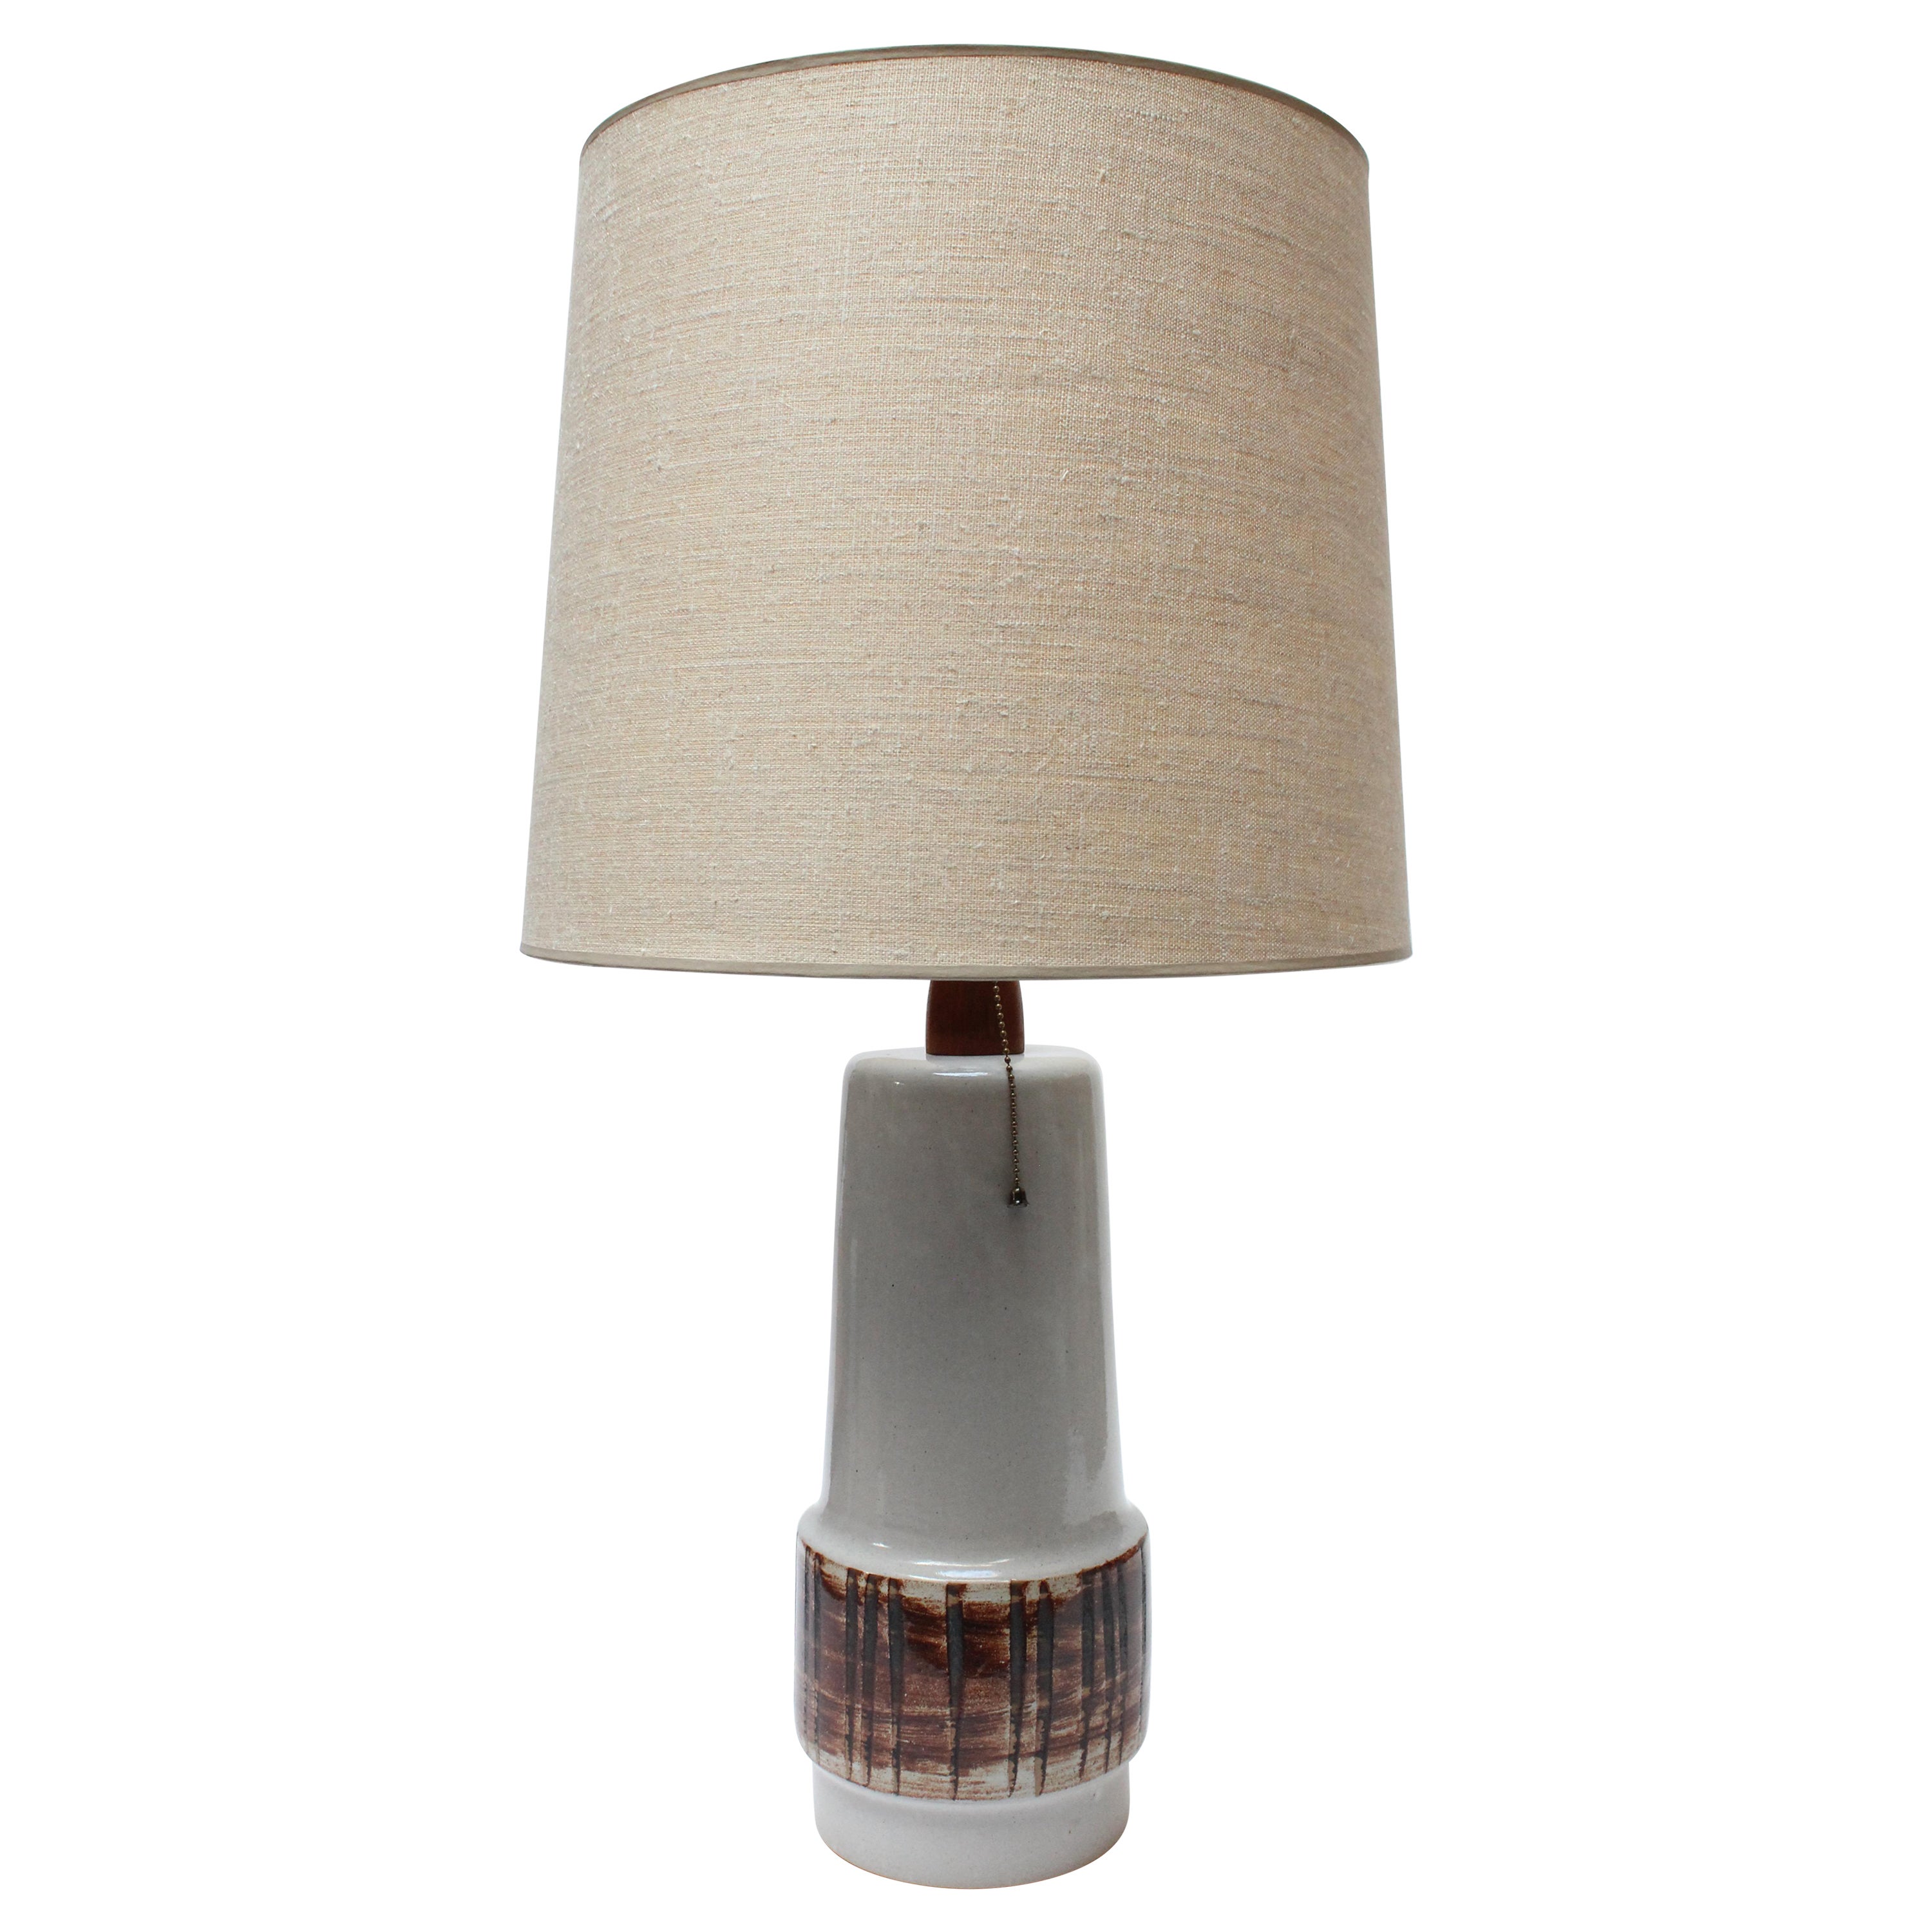 Large Gordon and Jane Martz Gray Ceramic Table Lamp with Shade and Finial